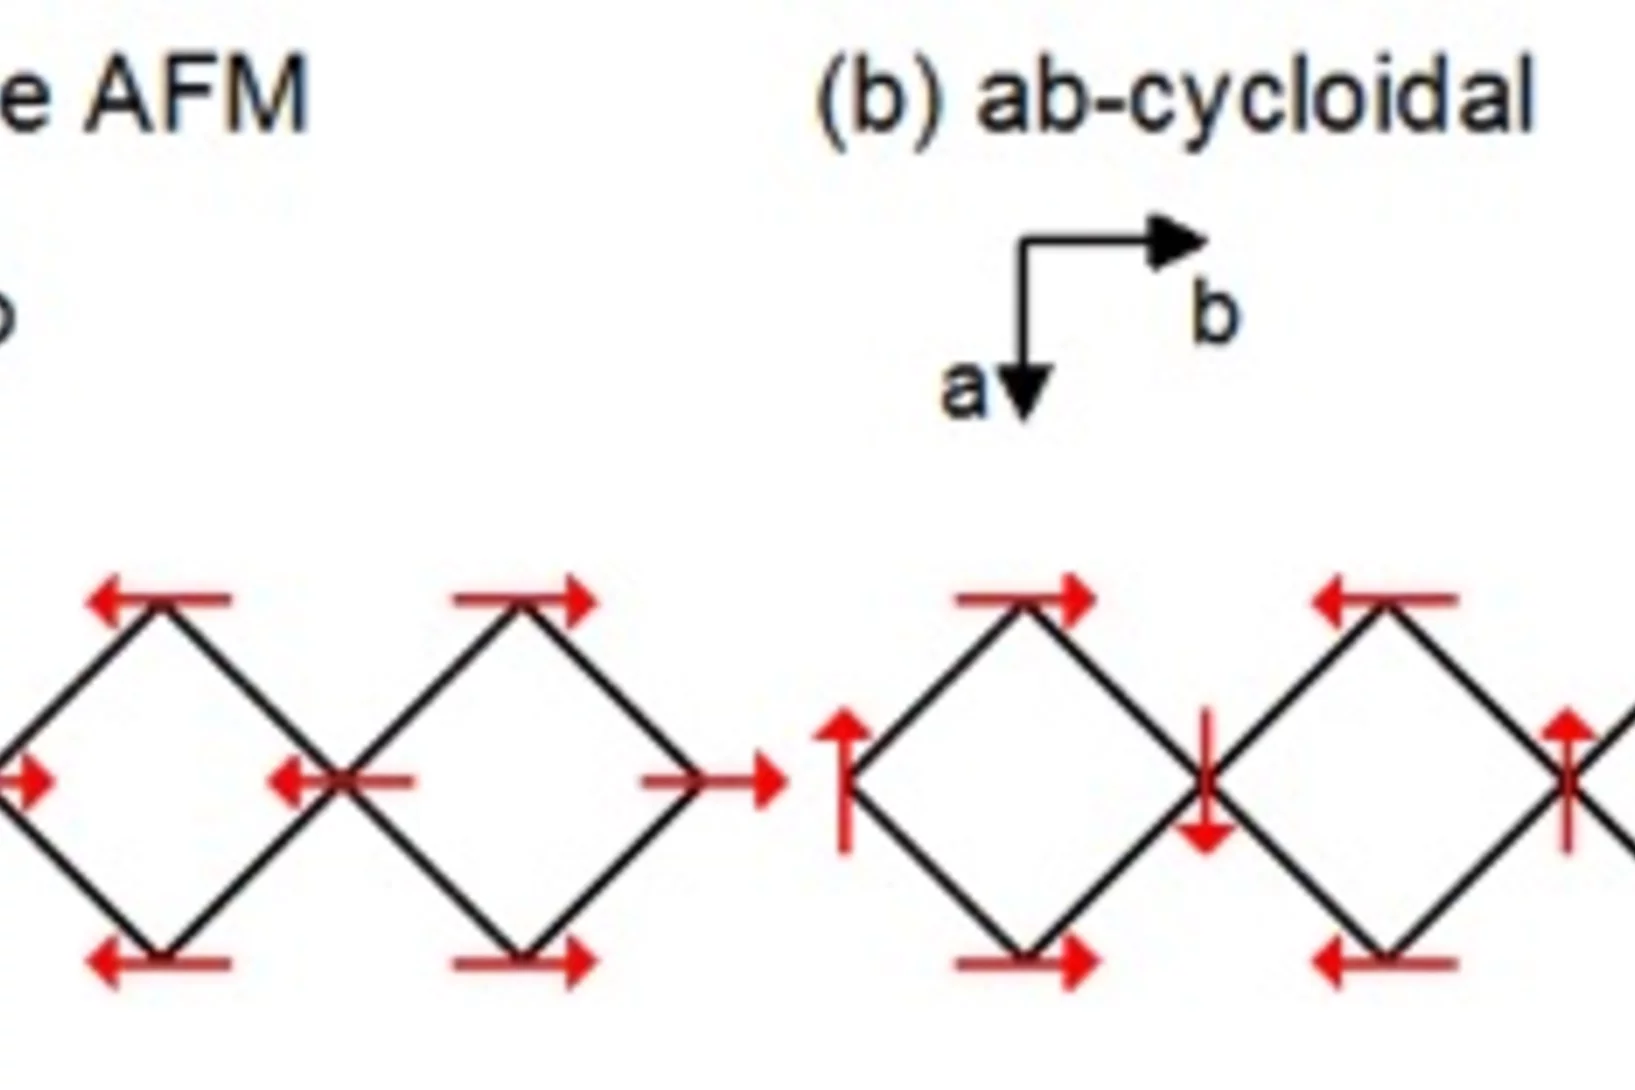 (a) Spins align antiparallel to each other, resulting in a large lattice strain and large electric polarization. (b) Spins align helically along the b-axis, resulting in small electric polarization.